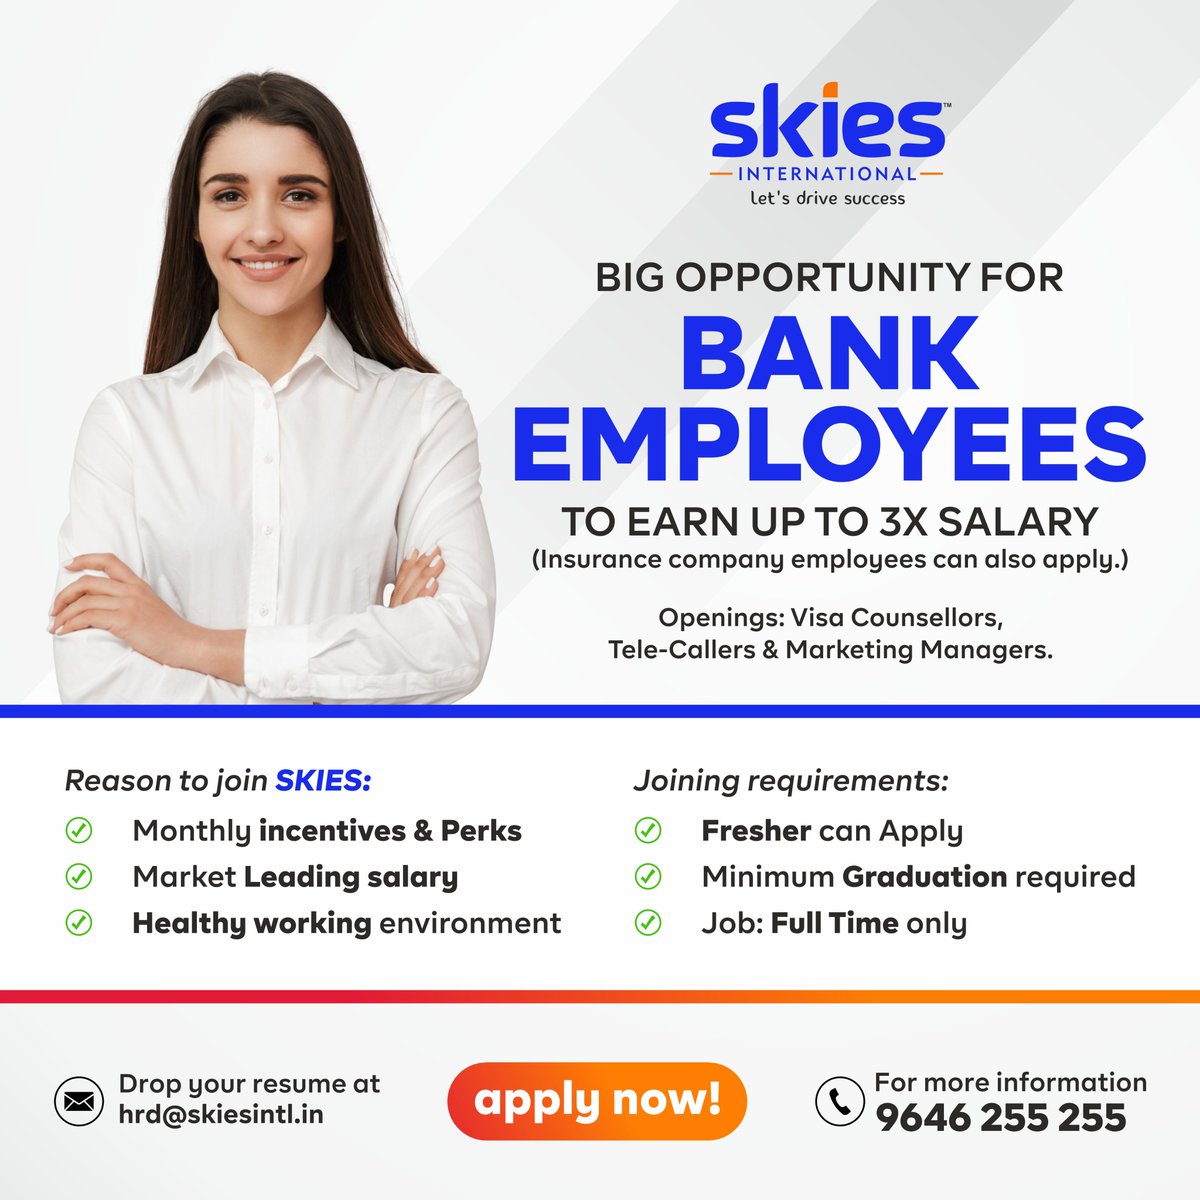 Join the Skies International team in Punjab, India!

We're expanding our family and looking for talented individuals to fill key roles at our Jalandhar and Sultanpur Lodhi branches. 

#SkiesInternationalCareers #PunjabJobs #JoinOurTeam #wearehiring #jobs #job #skiesinternational